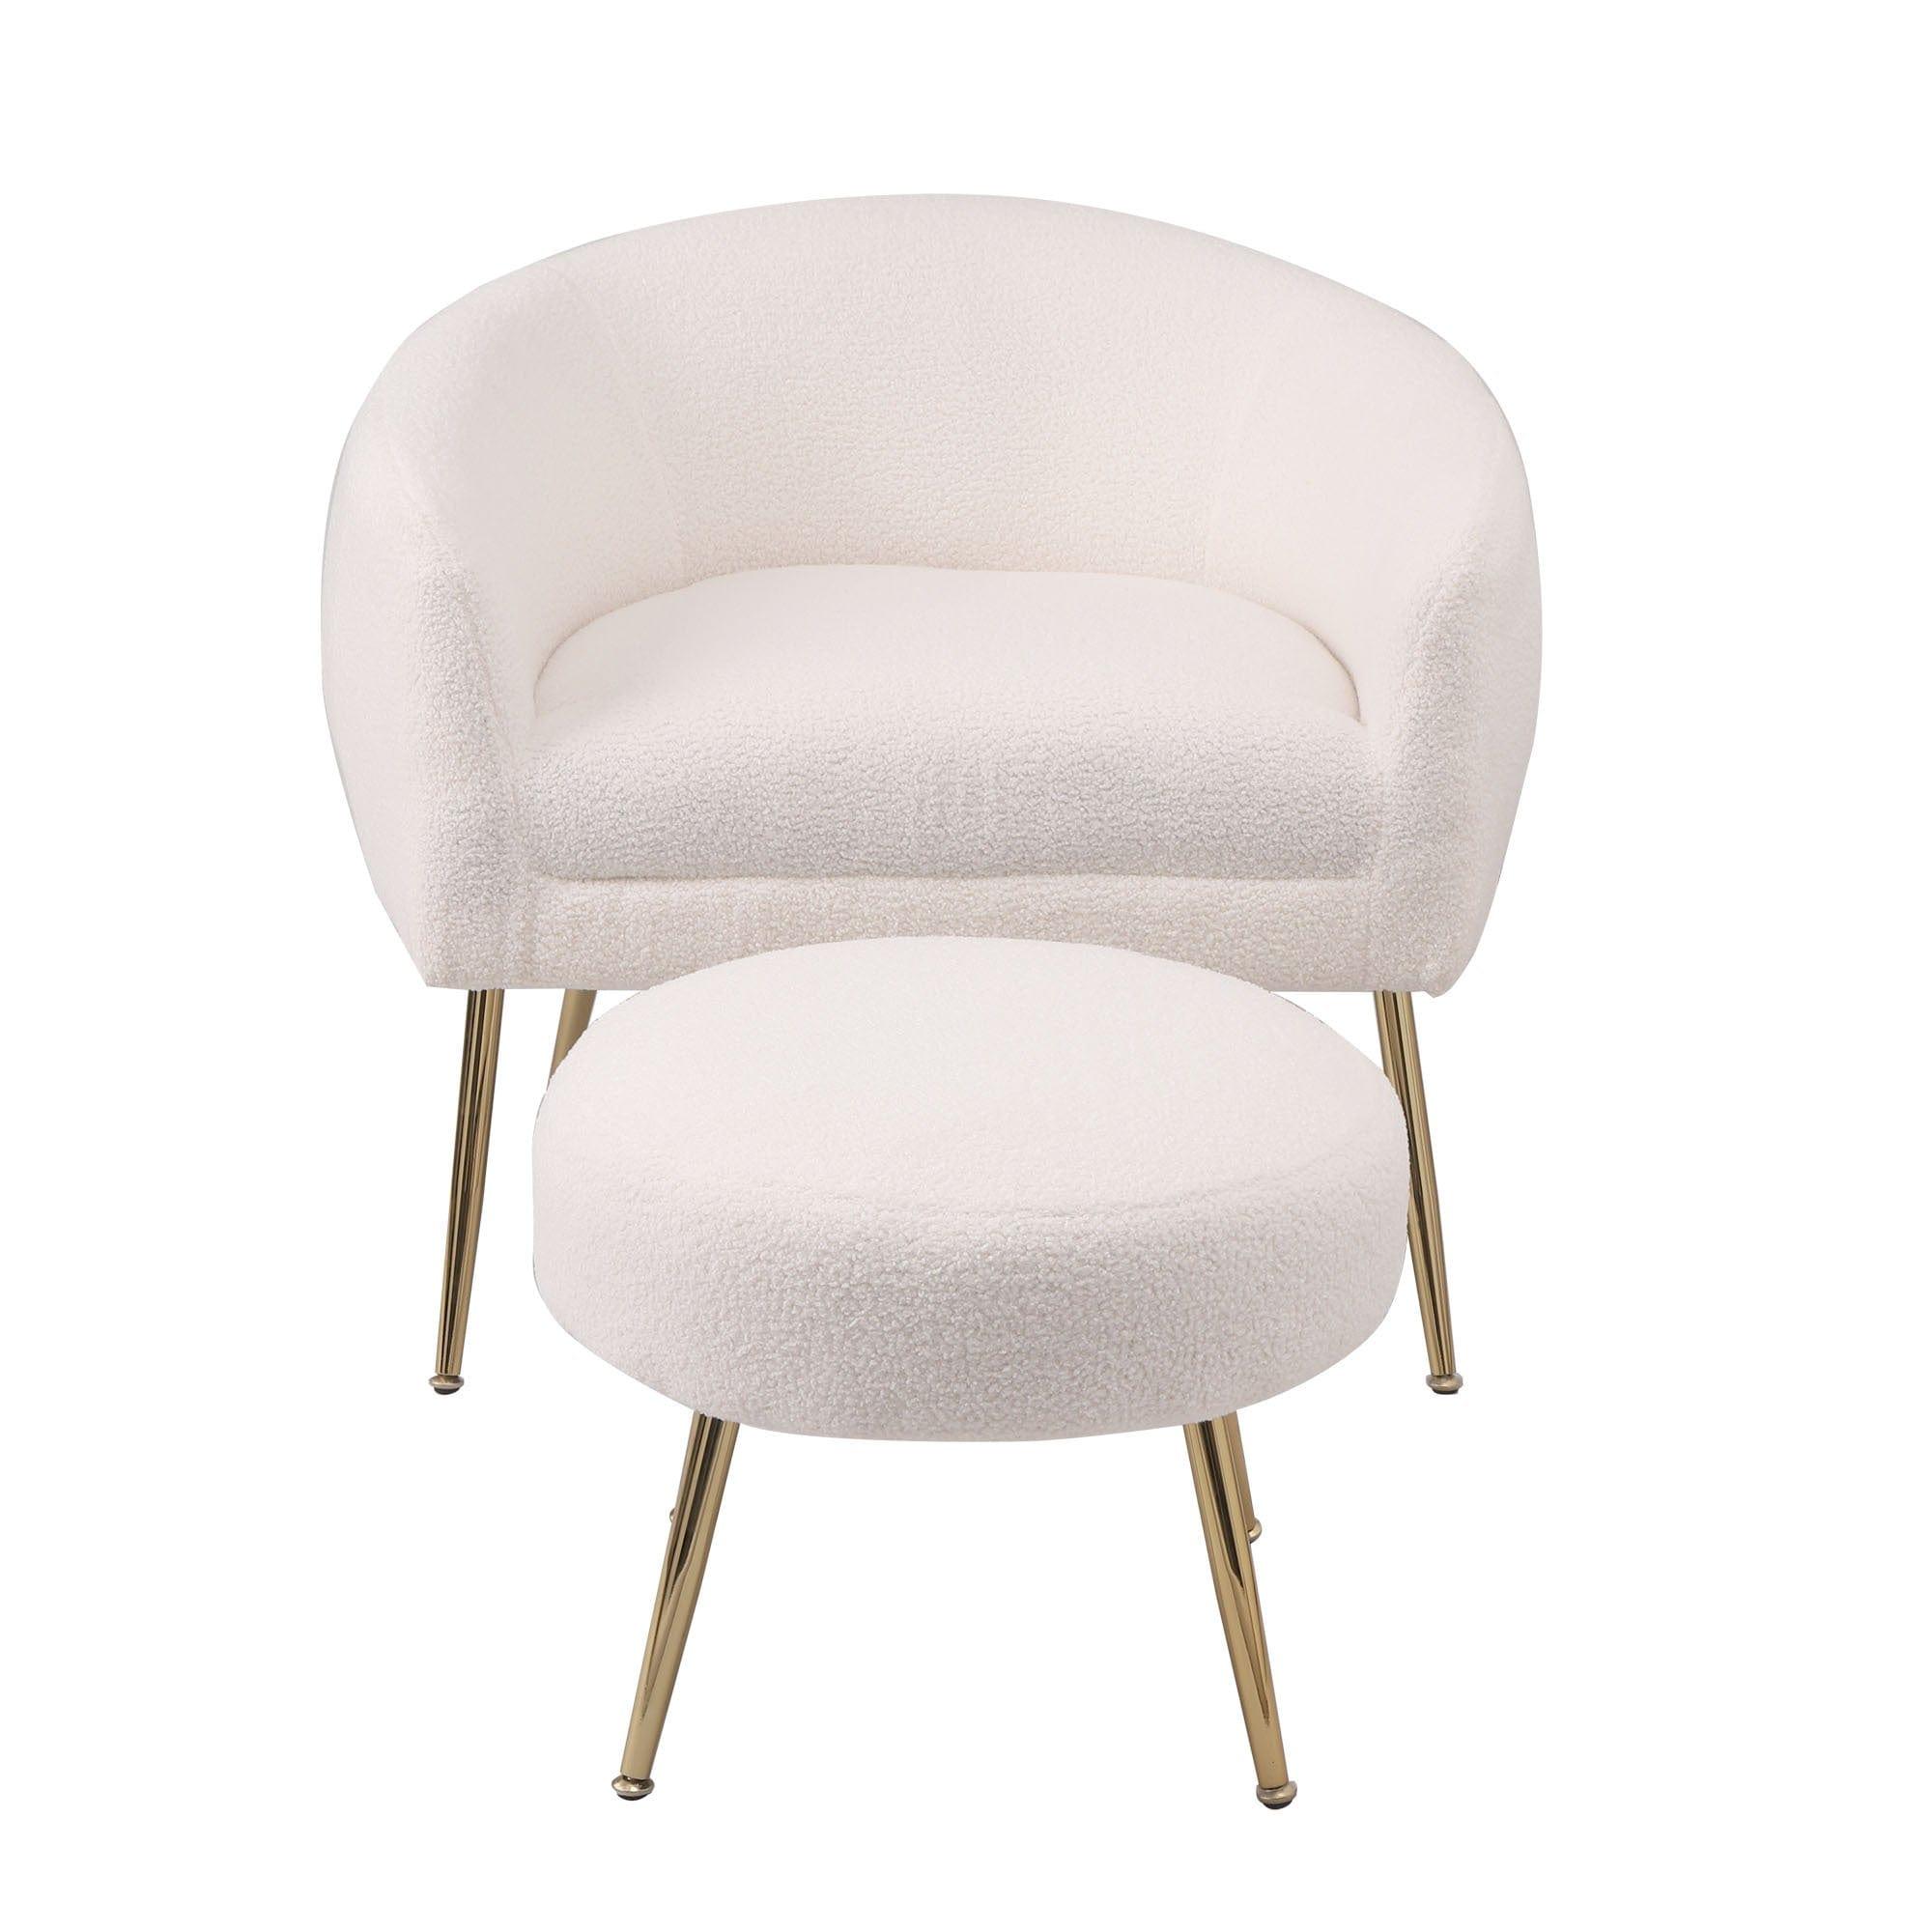 Shop Accent Chair with Ottoman/Gold Legs, Modern Accent Chair for Living Room, Bedroom or Reception Room,Teddy Short Plush Particle Velvet Armchair with Ottoman for Living Room Mademoiselle Home Decor